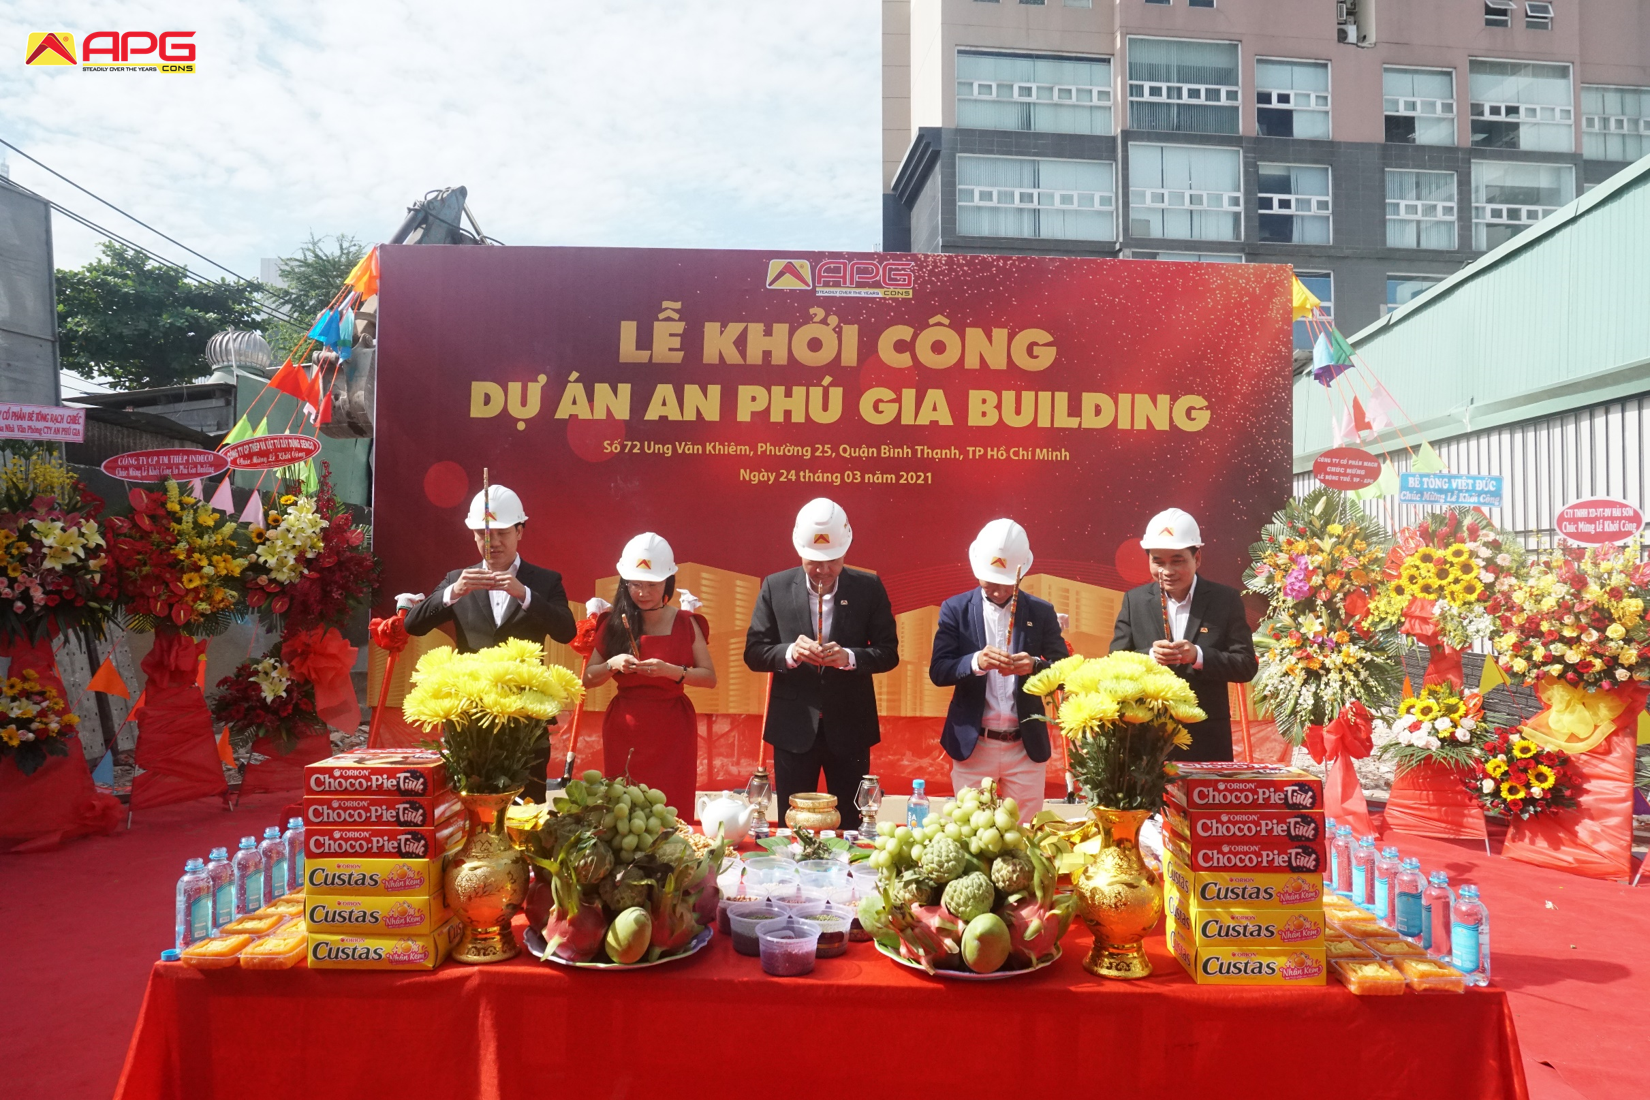 GROUNDBREAKING CEREMONY OF THE PROJECT “AN PHU GIA BUILDING”